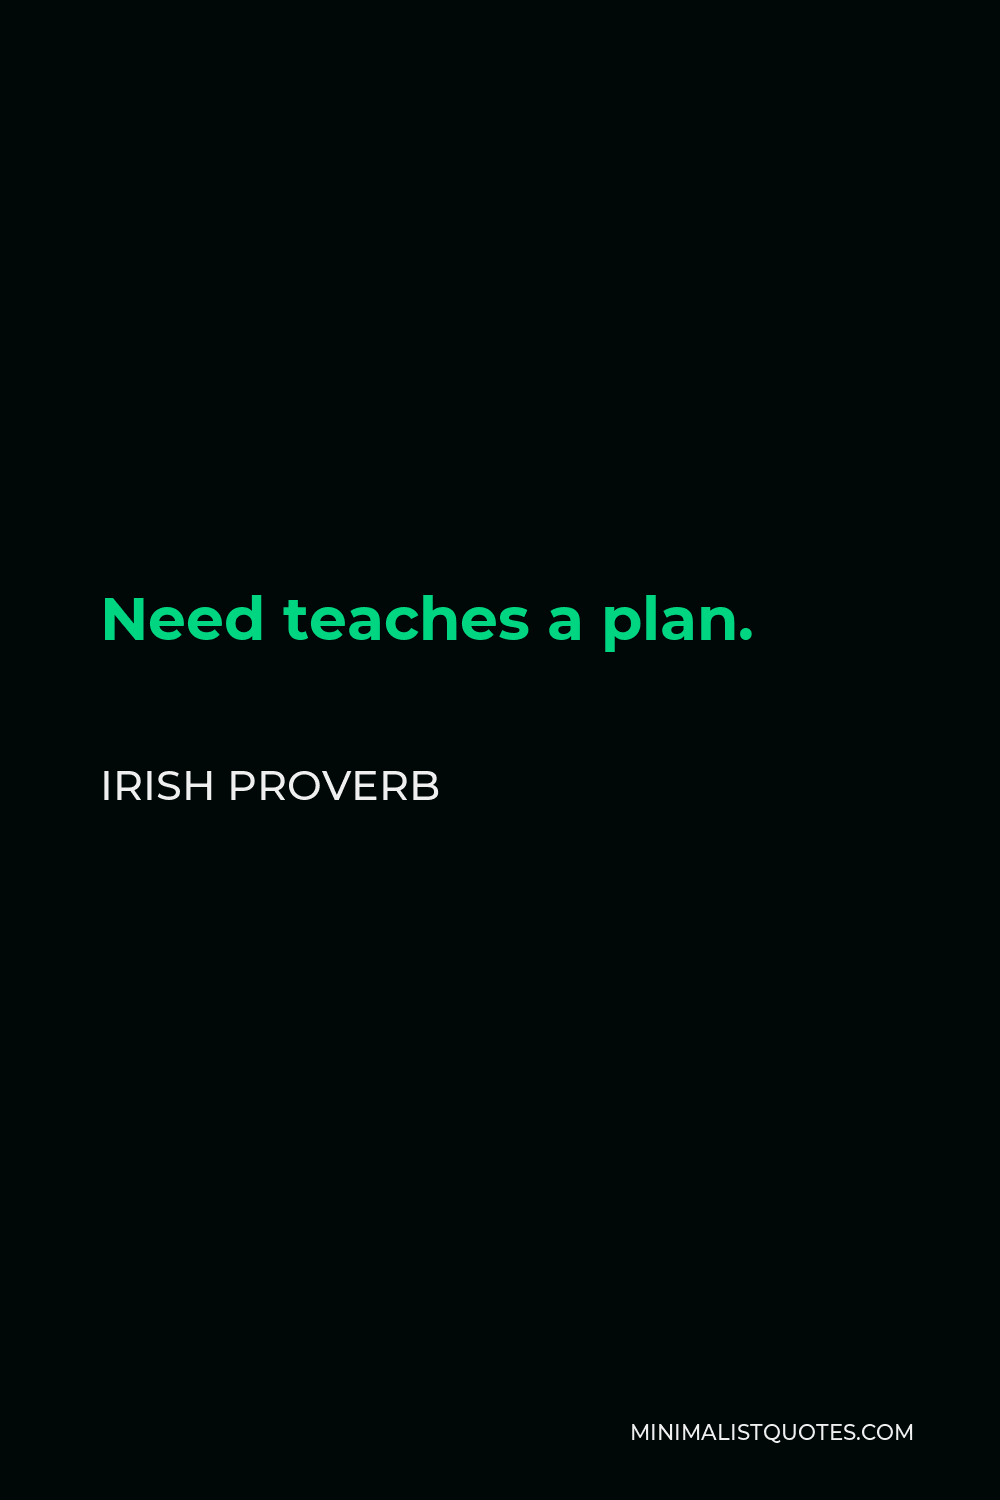 Irish Proverb Quote - Need teaches a plan.